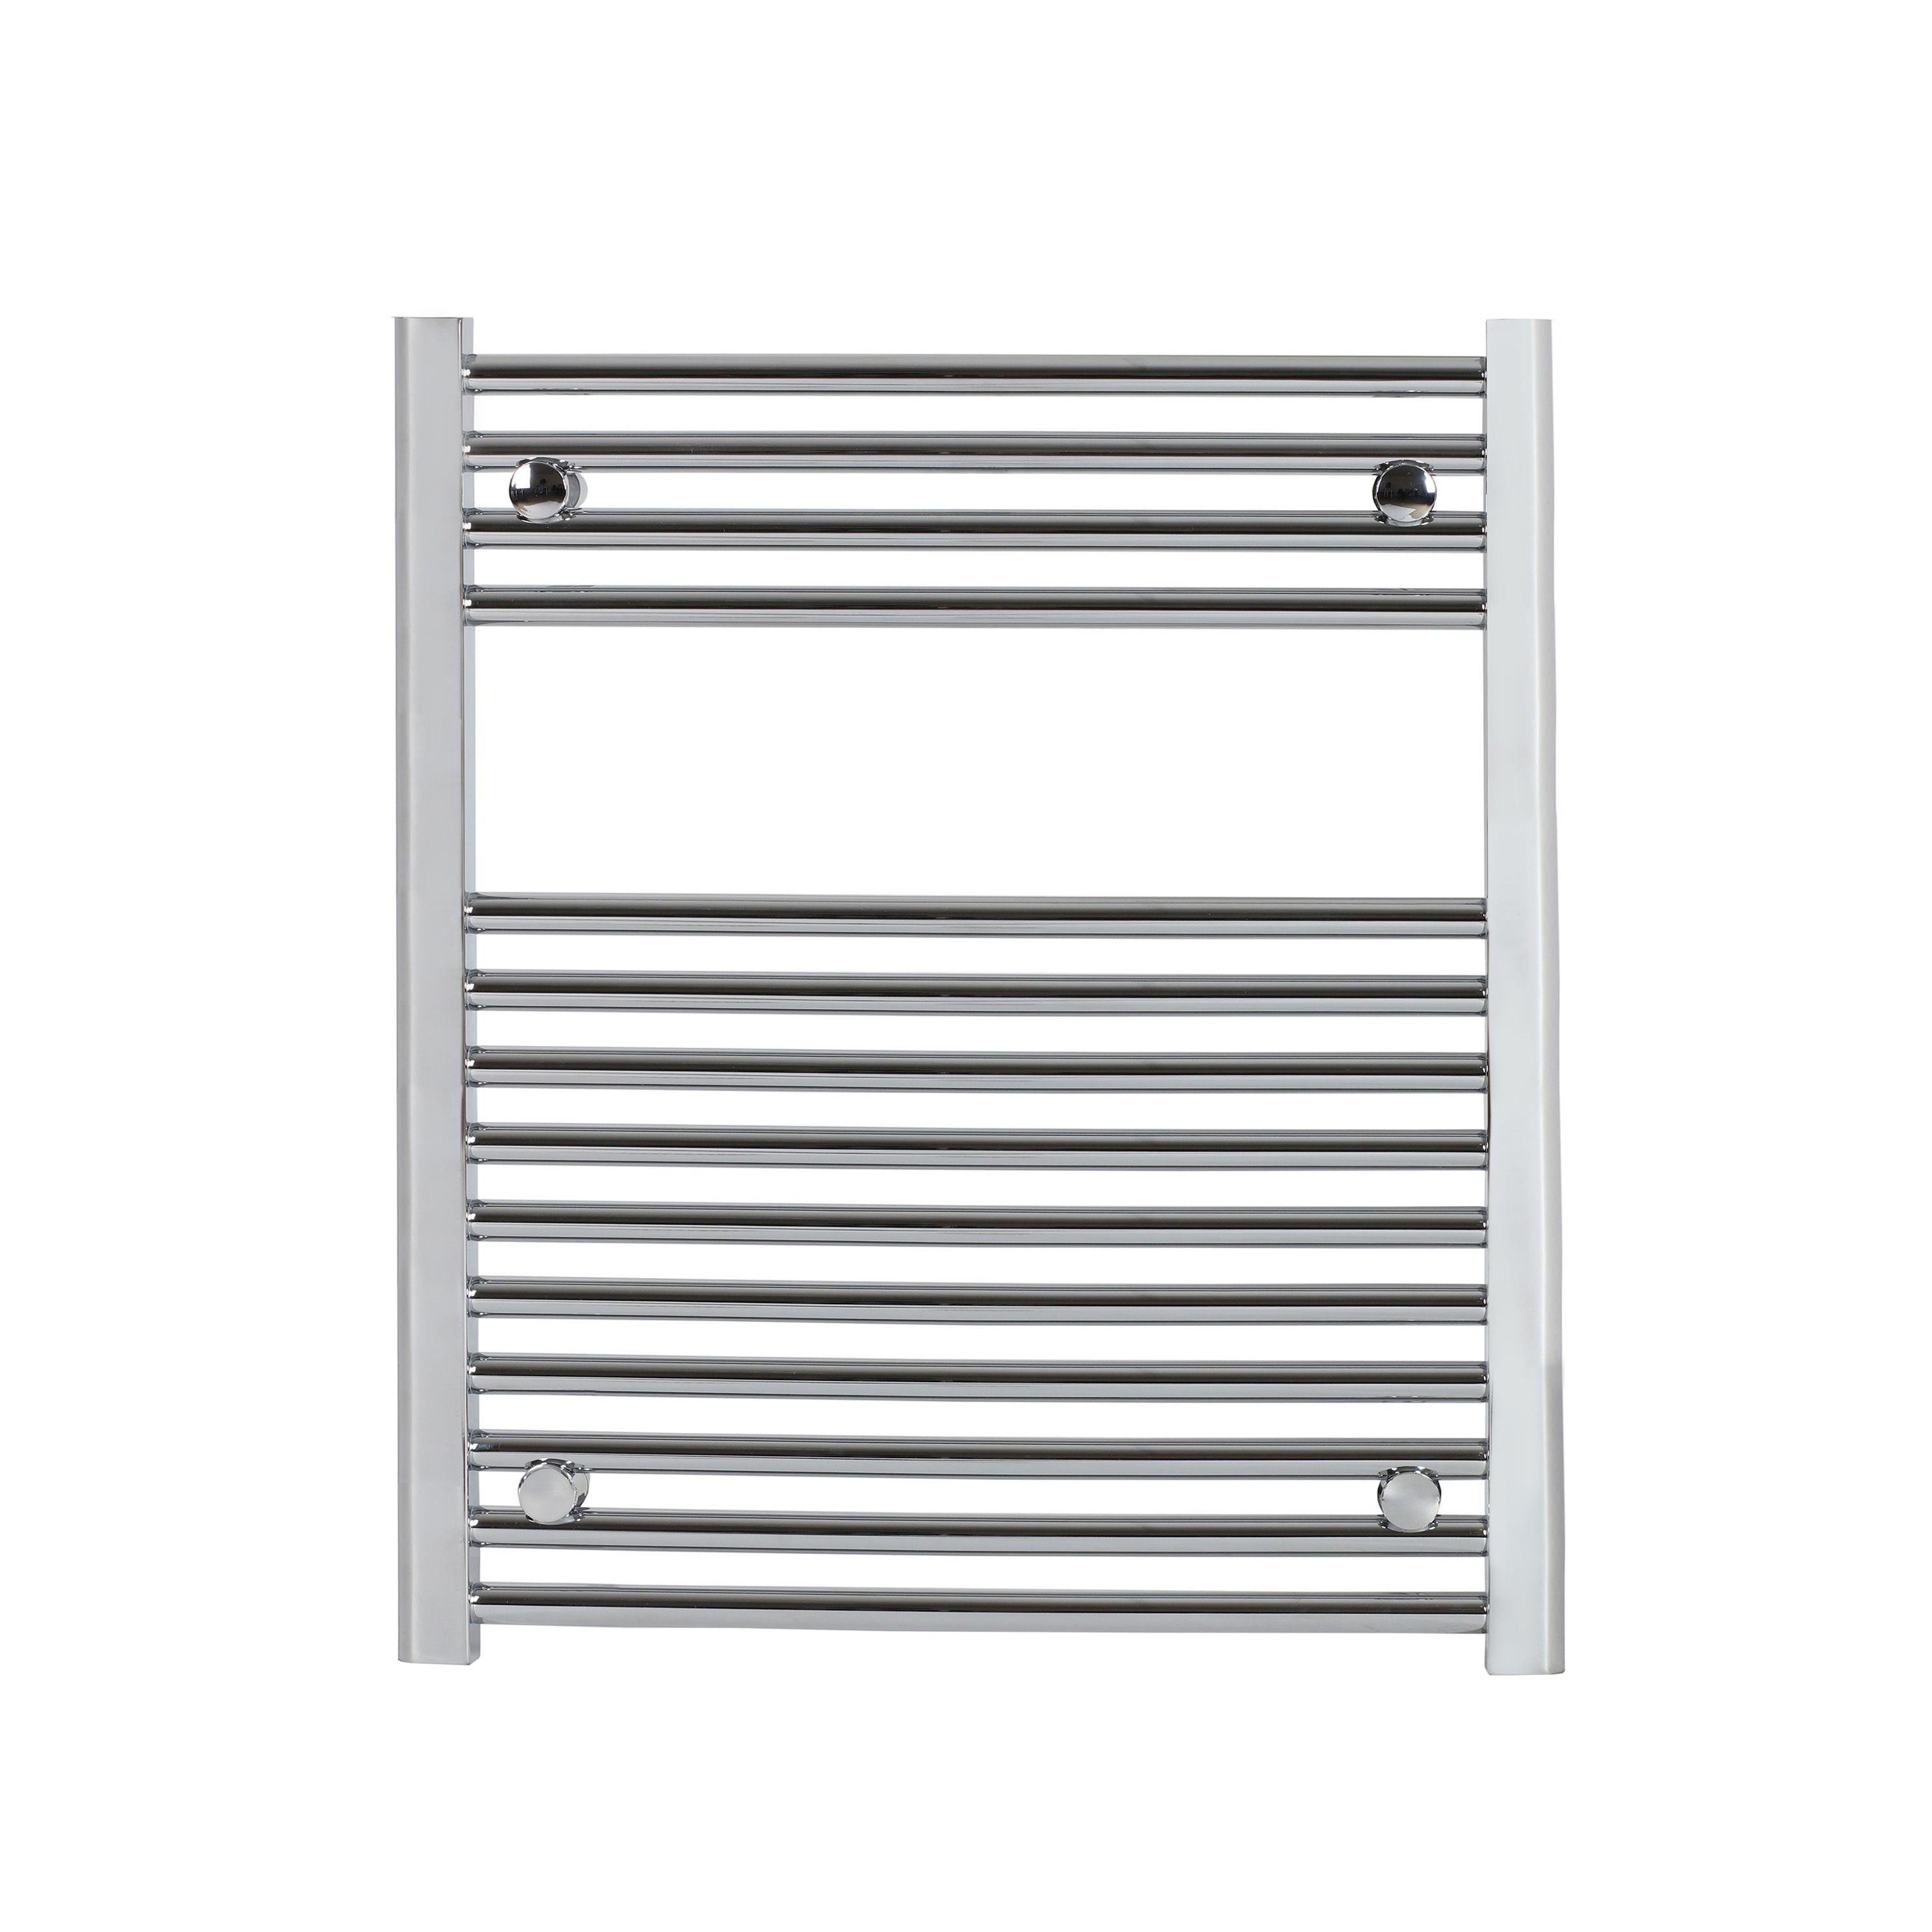 Flomasta Curved Chrome effect Vertical Curved Towel radiator (W)600mm x (H)700mm